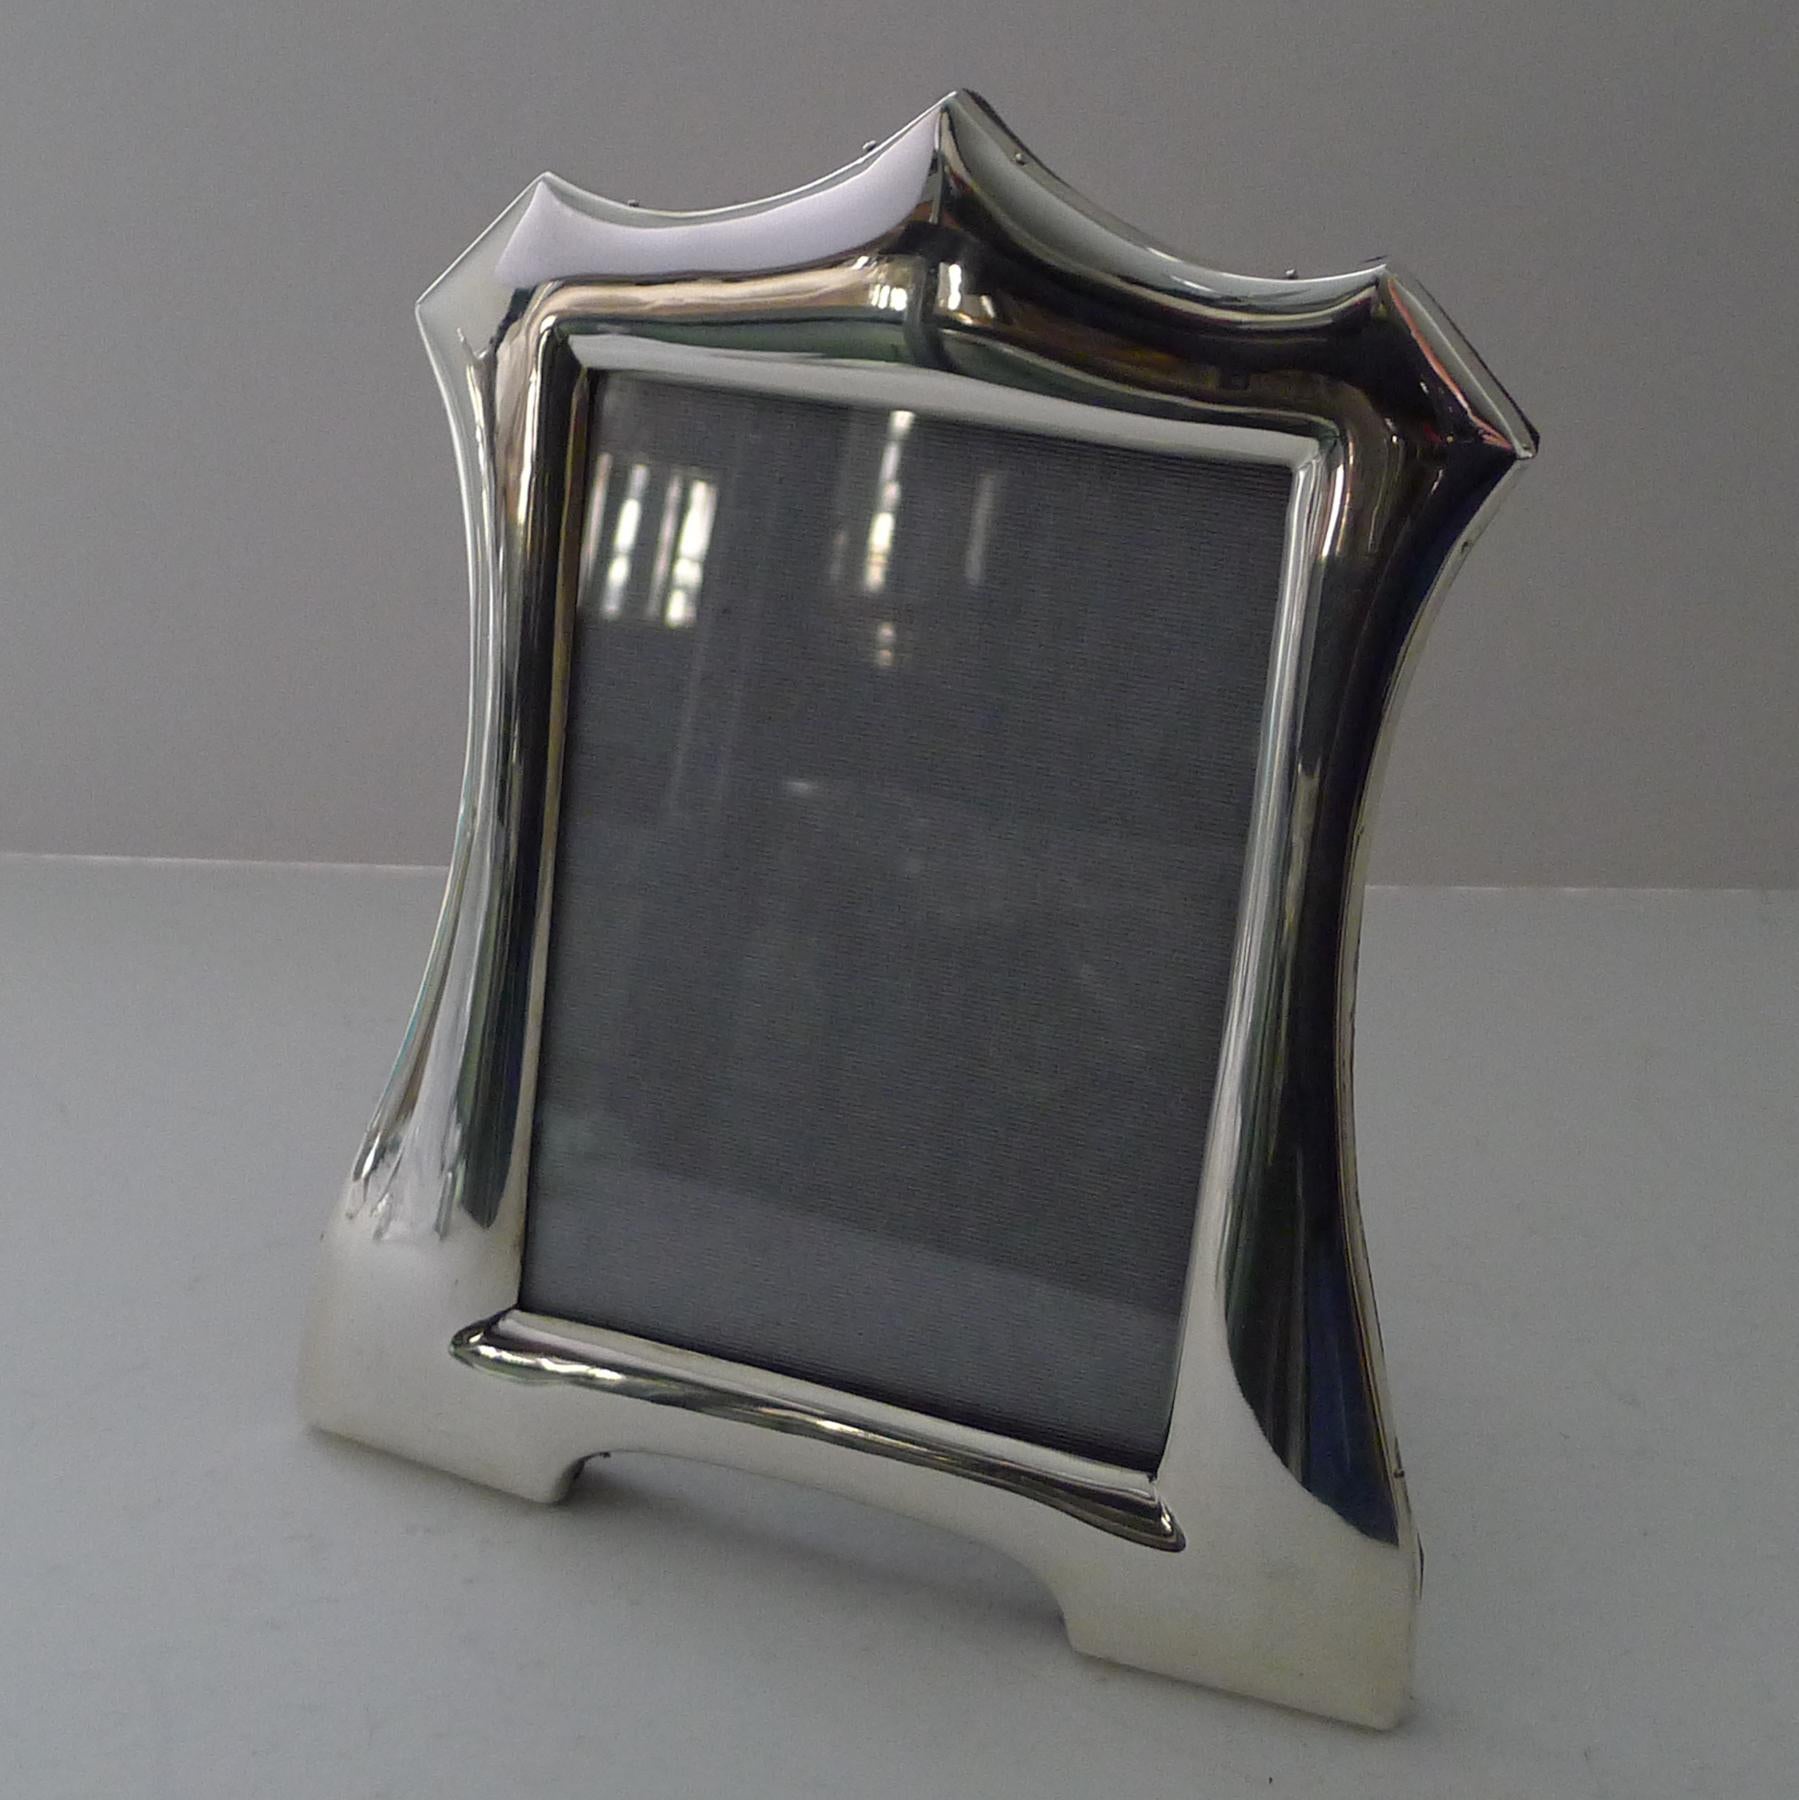 A very elegant English silver picture frame, a lovely shape fully hallmarked for Birmingham 1913 together with the makers mark for the well renowned silversmith, Walker and Hall.

The back has a solid English Oak backing incorporating a folding